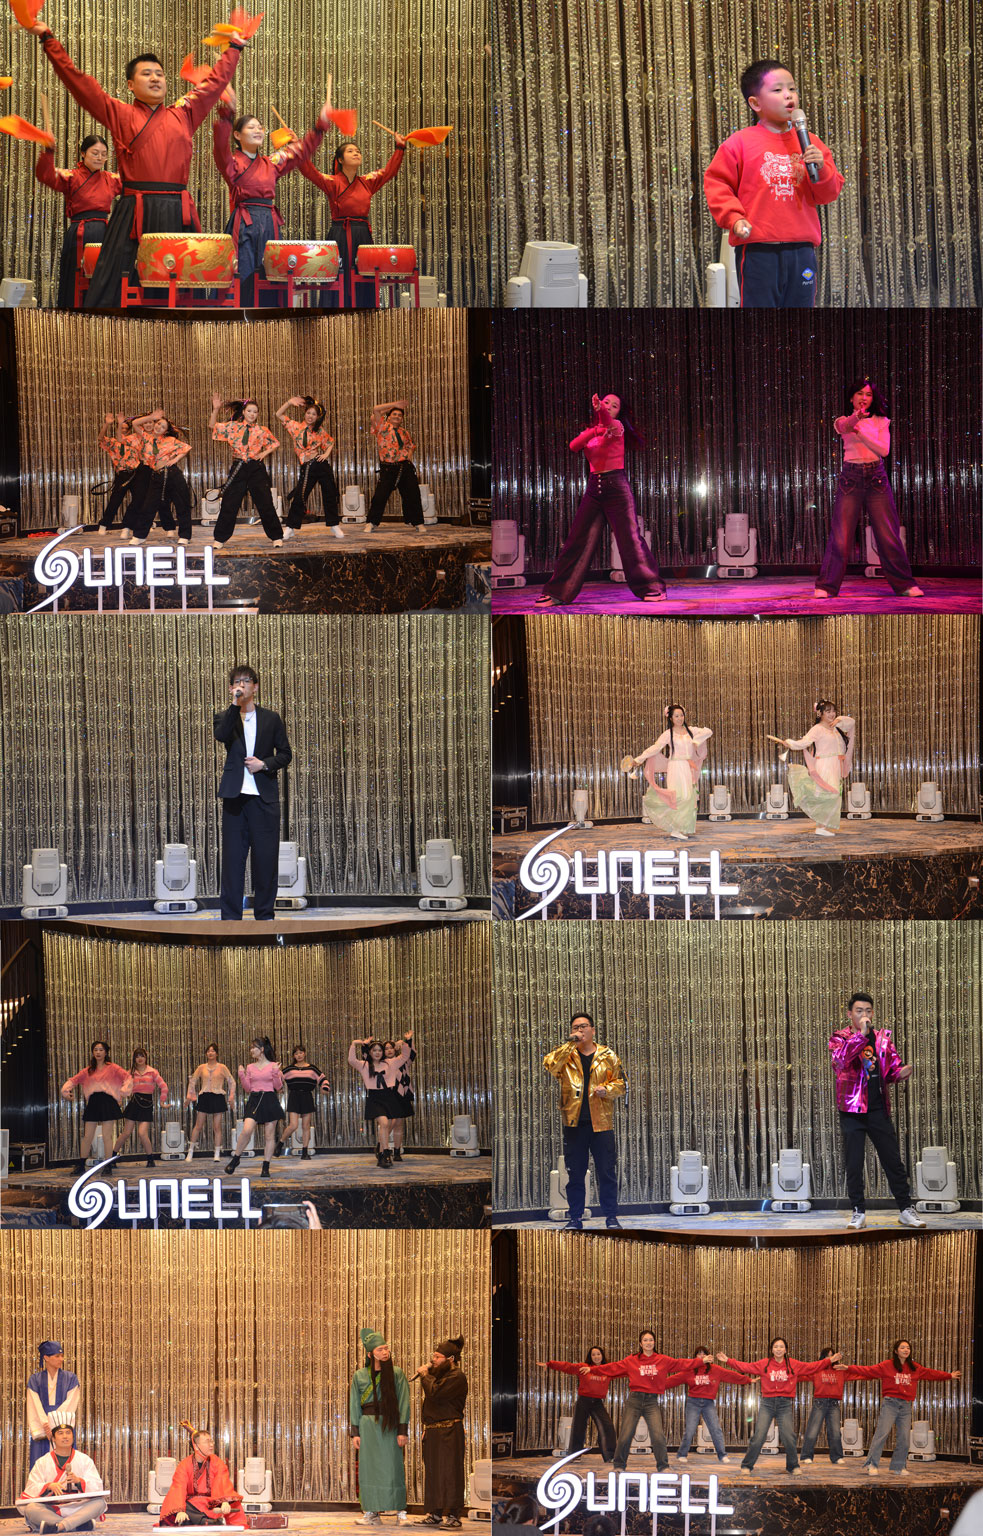 Sunell's-year-end-gala-featured-cultural-performances,-team-building-activities.jpg